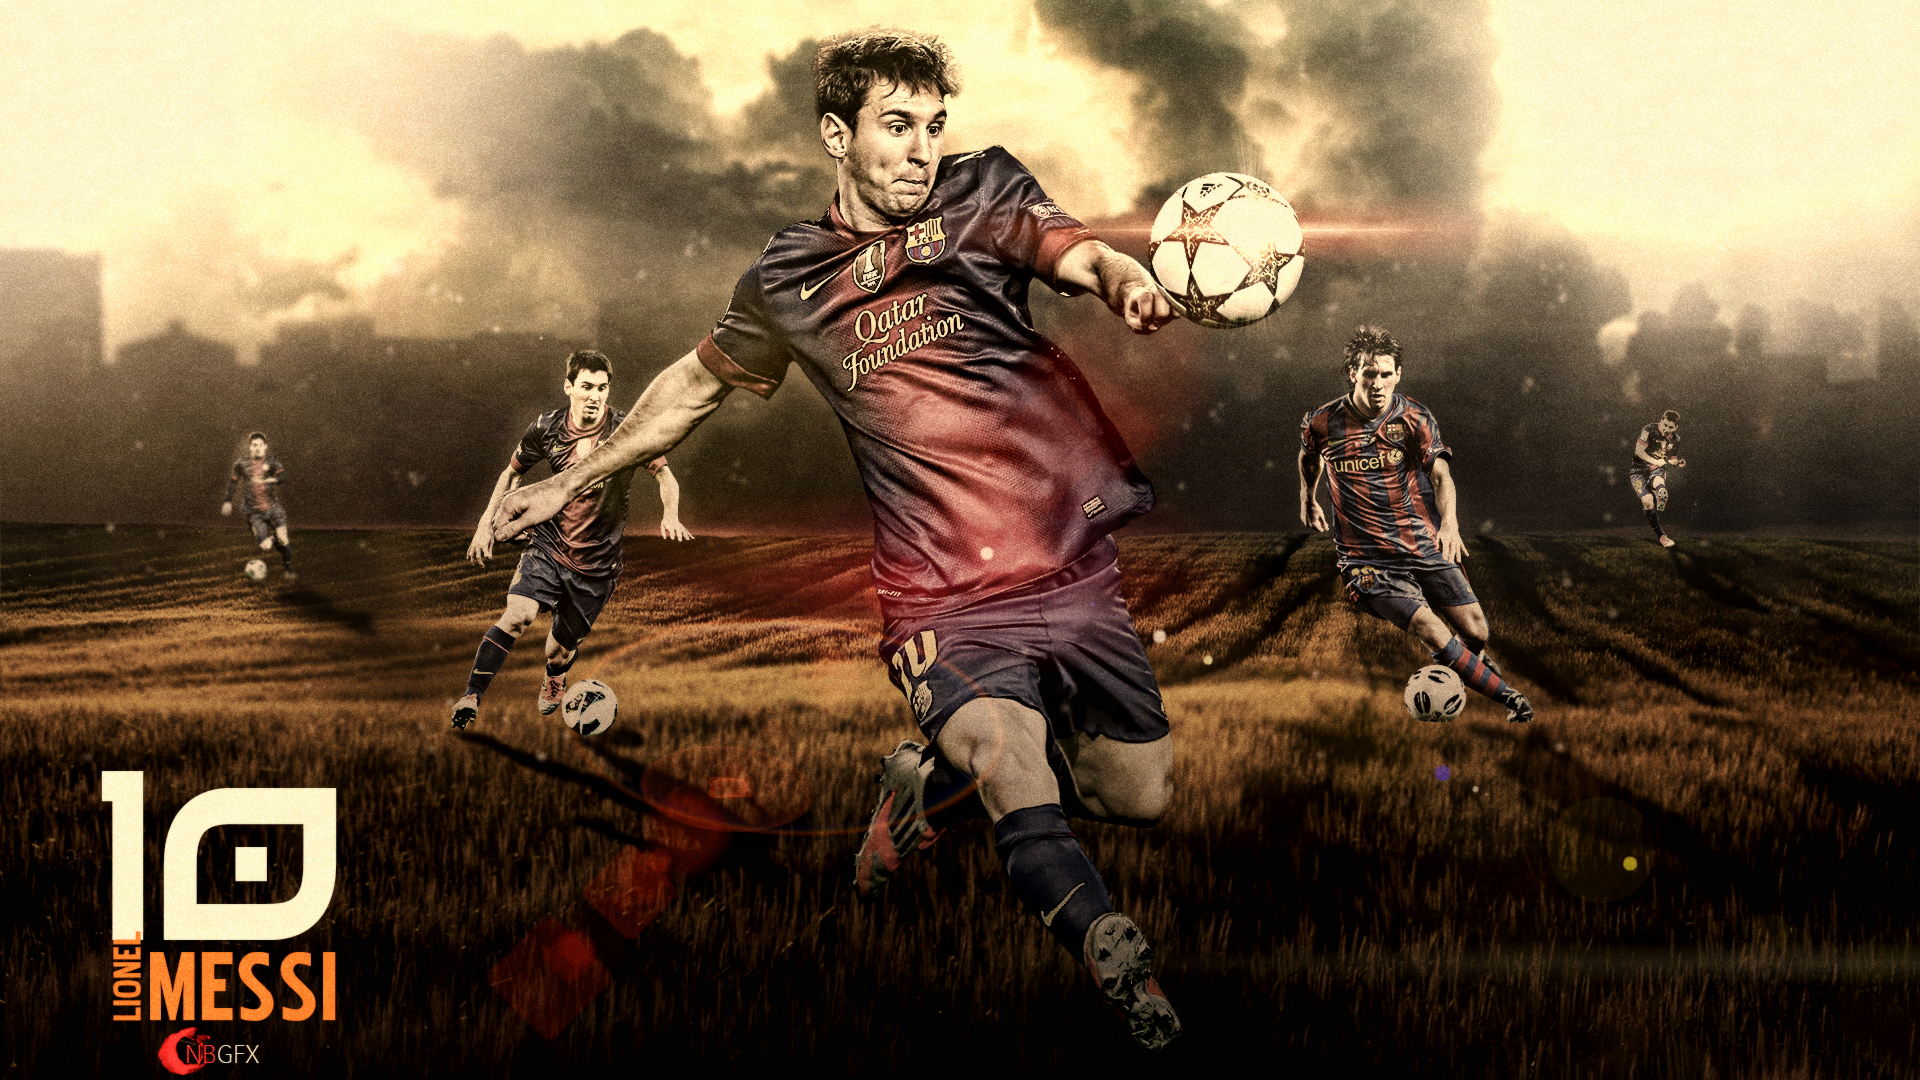 Lionel Messi Digital Art Wallpaper, HD Sports 4K Wallpapers, Images, Photos  and Background - Wallpapers Den